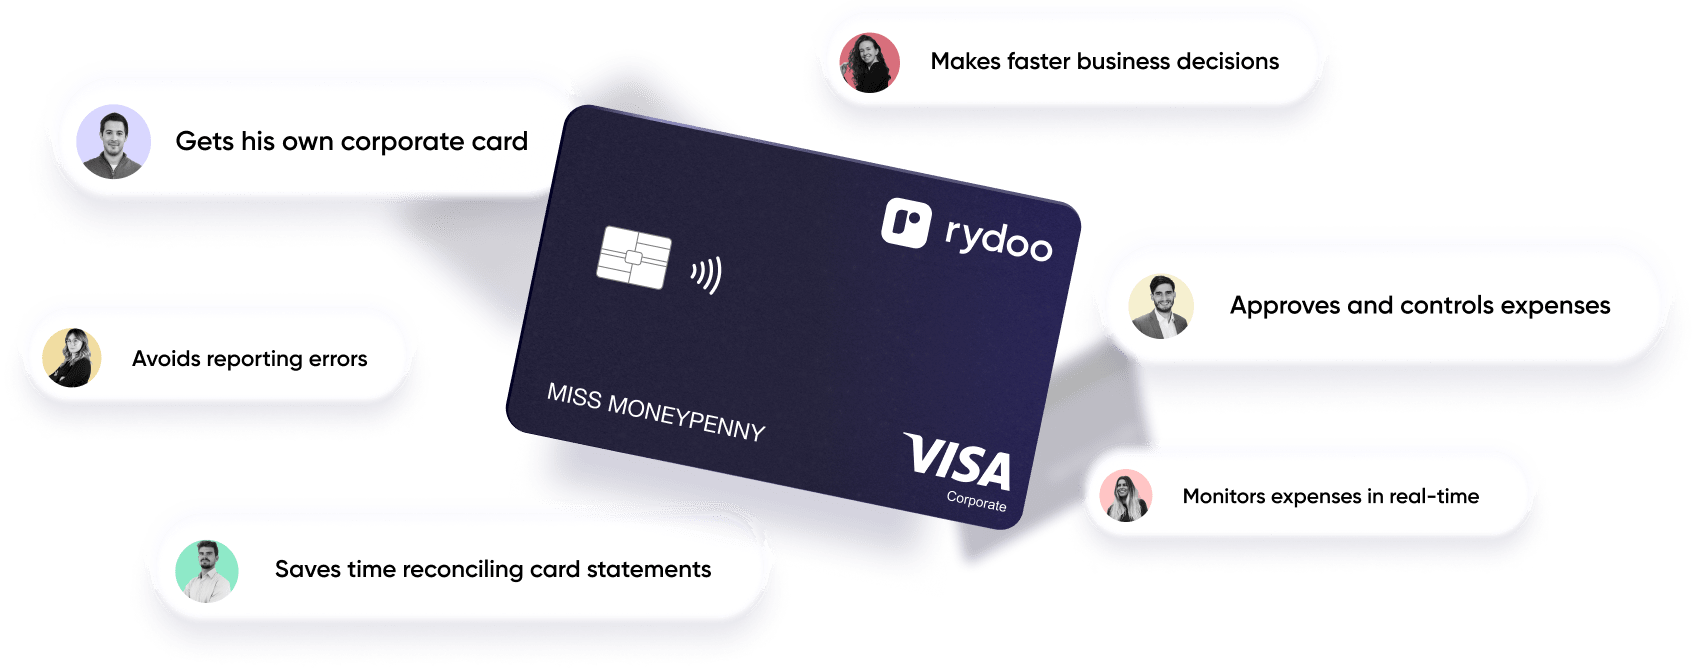 Make faster business decisions, approve and control expenses, monitor expenses in real-time, save time reconciling card staements, saves time and avoid reporting errors, use a corporate card for business expenses